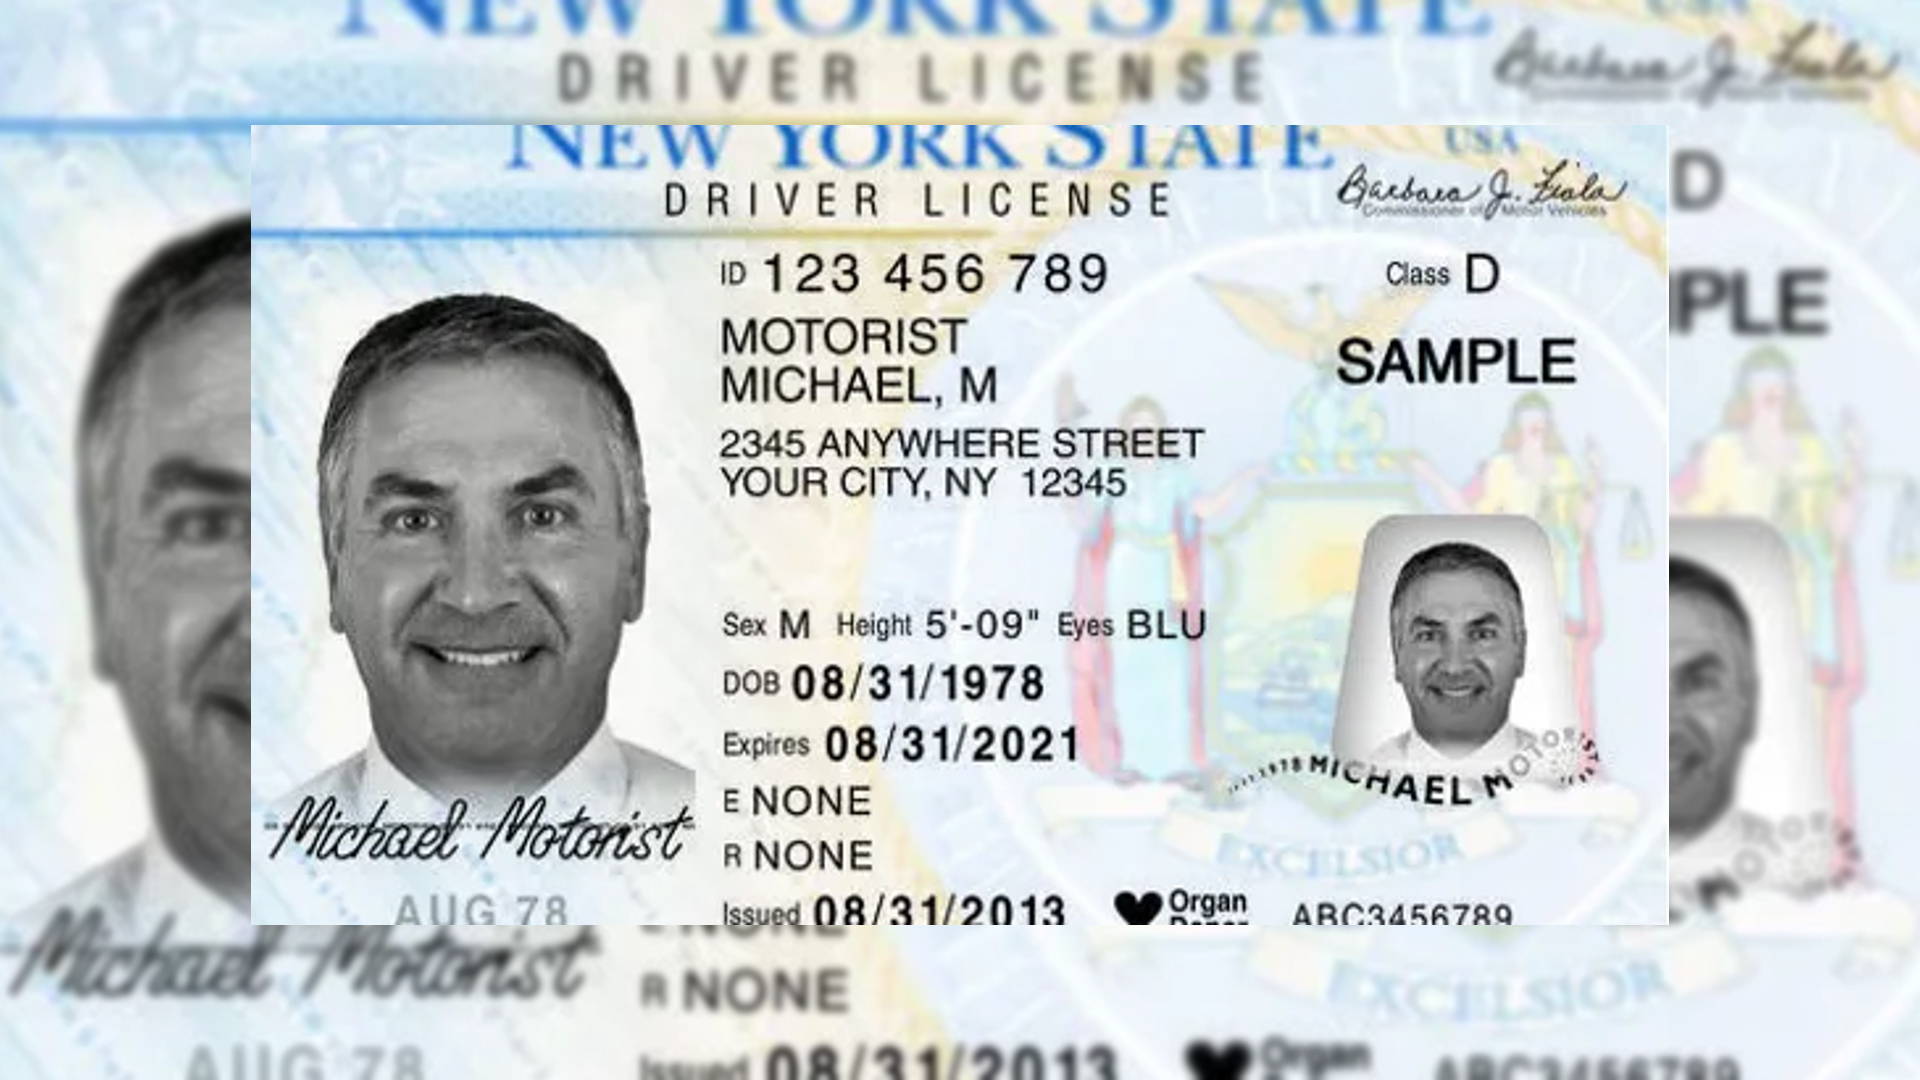 Trump Goes After New York Over Drivers License Policy